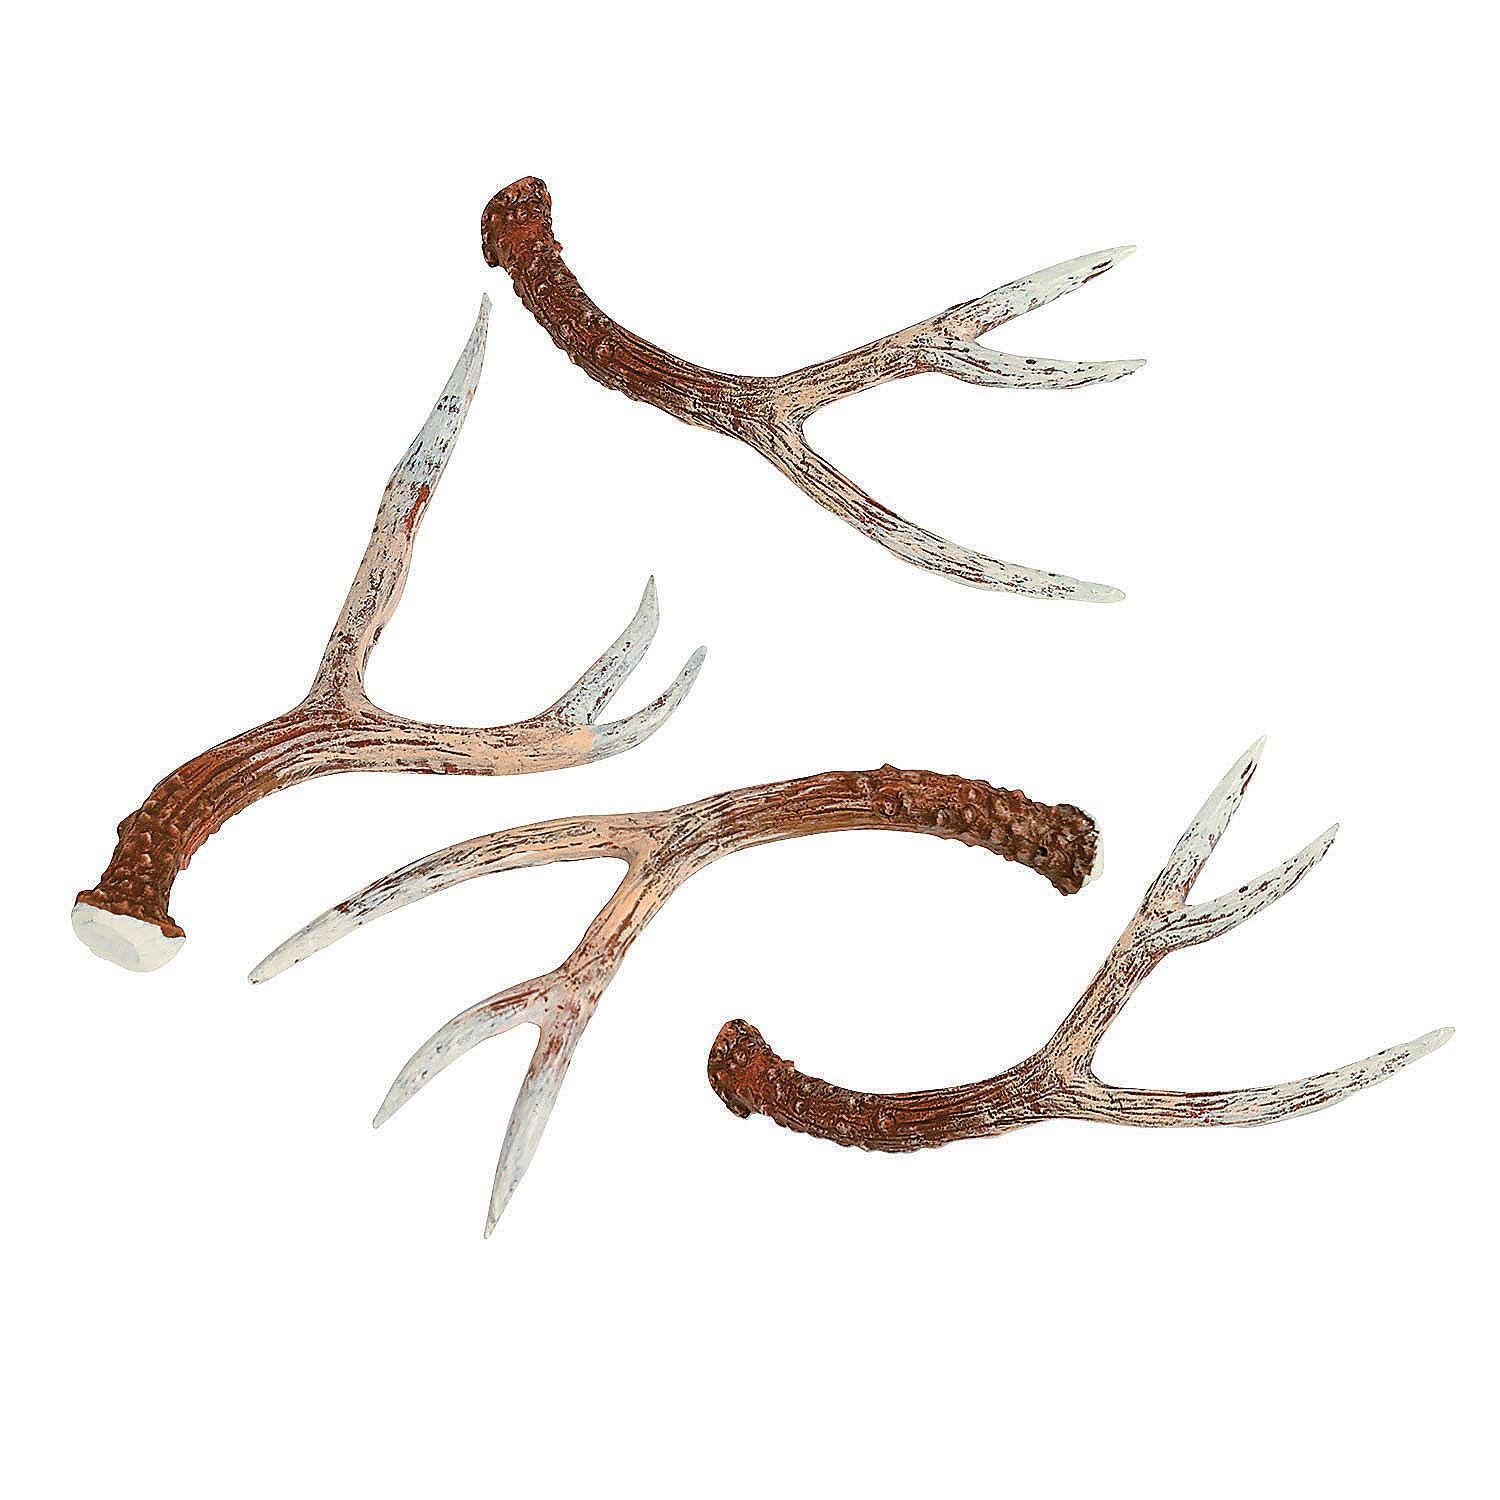 Resin Deer Antlers (4 Inches Long) (Set of 4) Hand Painted - Decorative Crafts -Rustic Decor | Amazon (US)